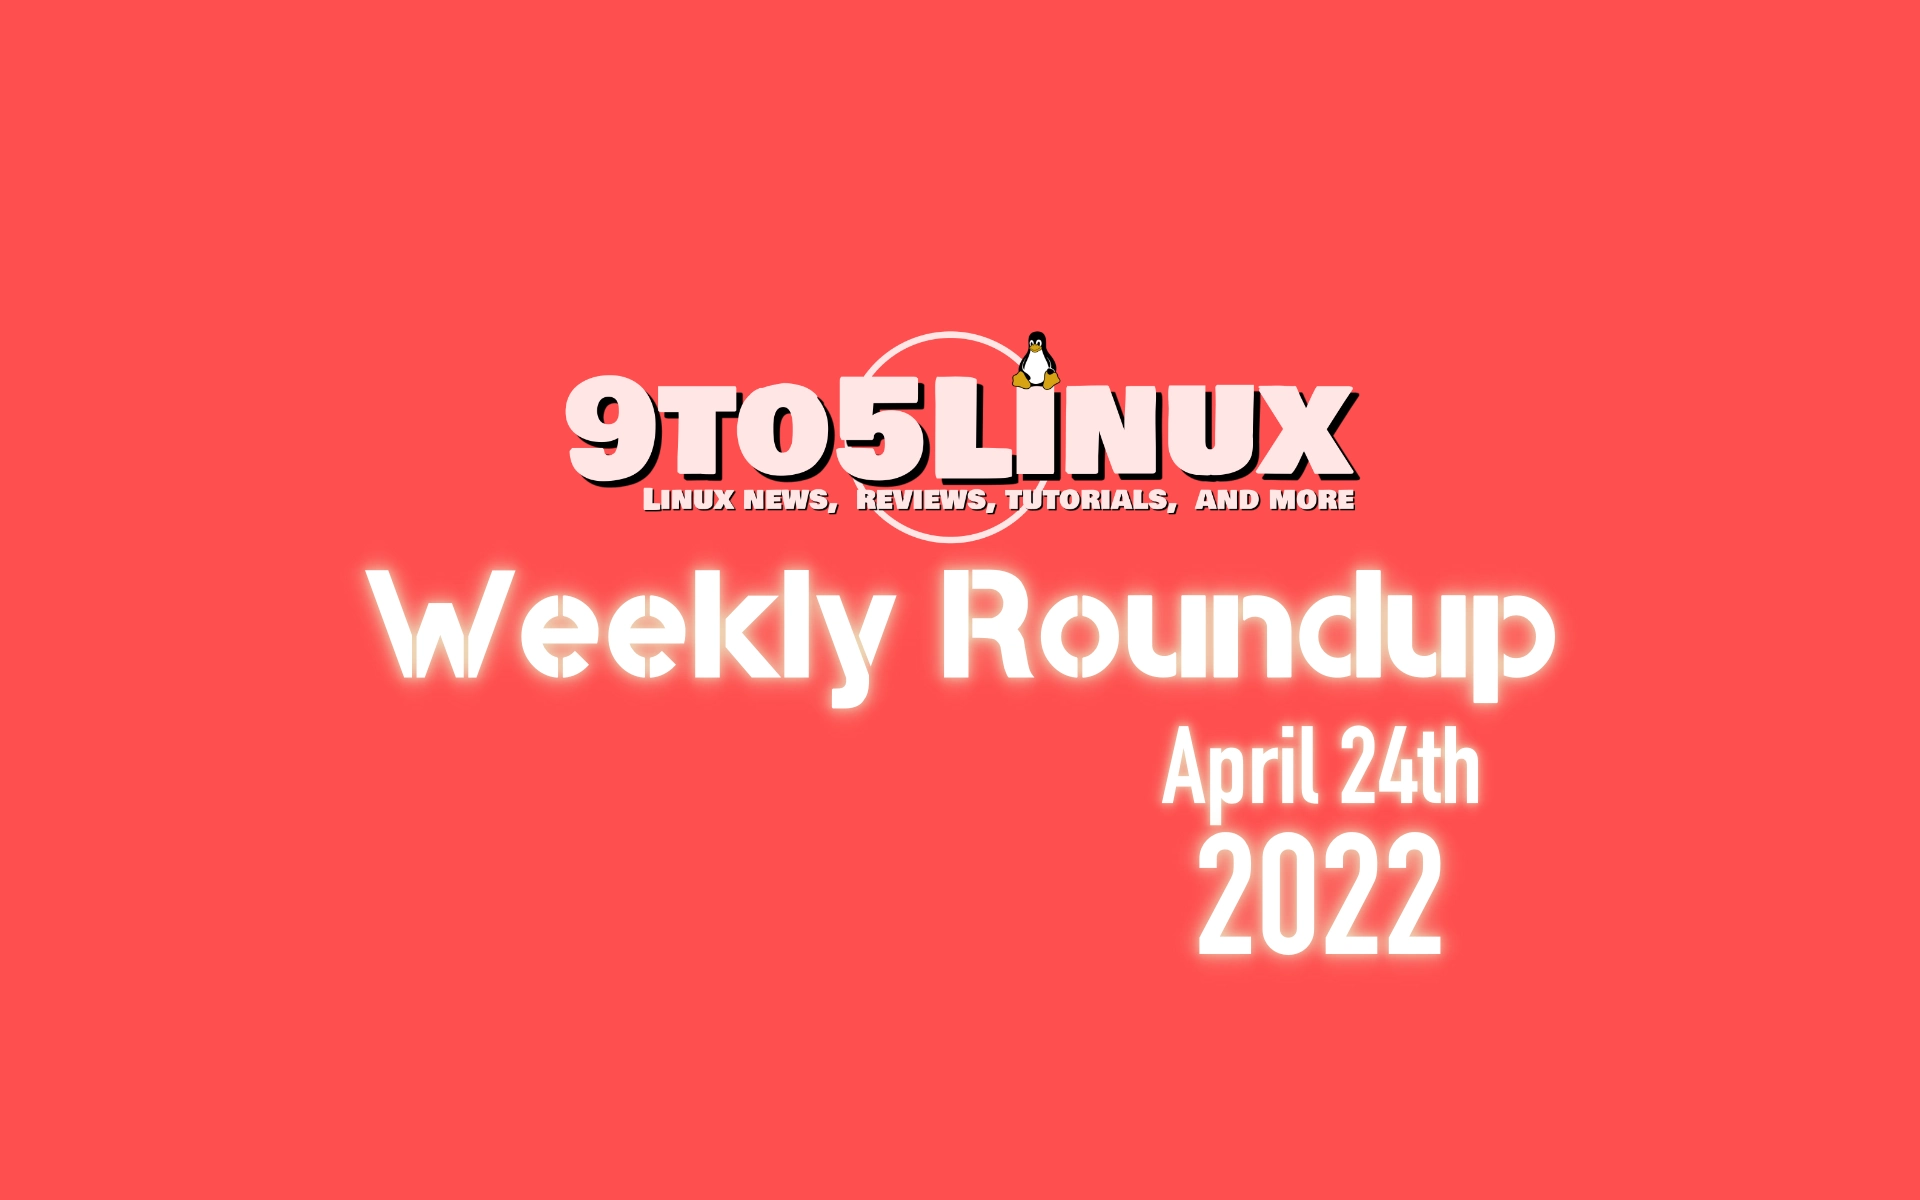 9to5Linux Weekly Roundup: April 24th, 2022